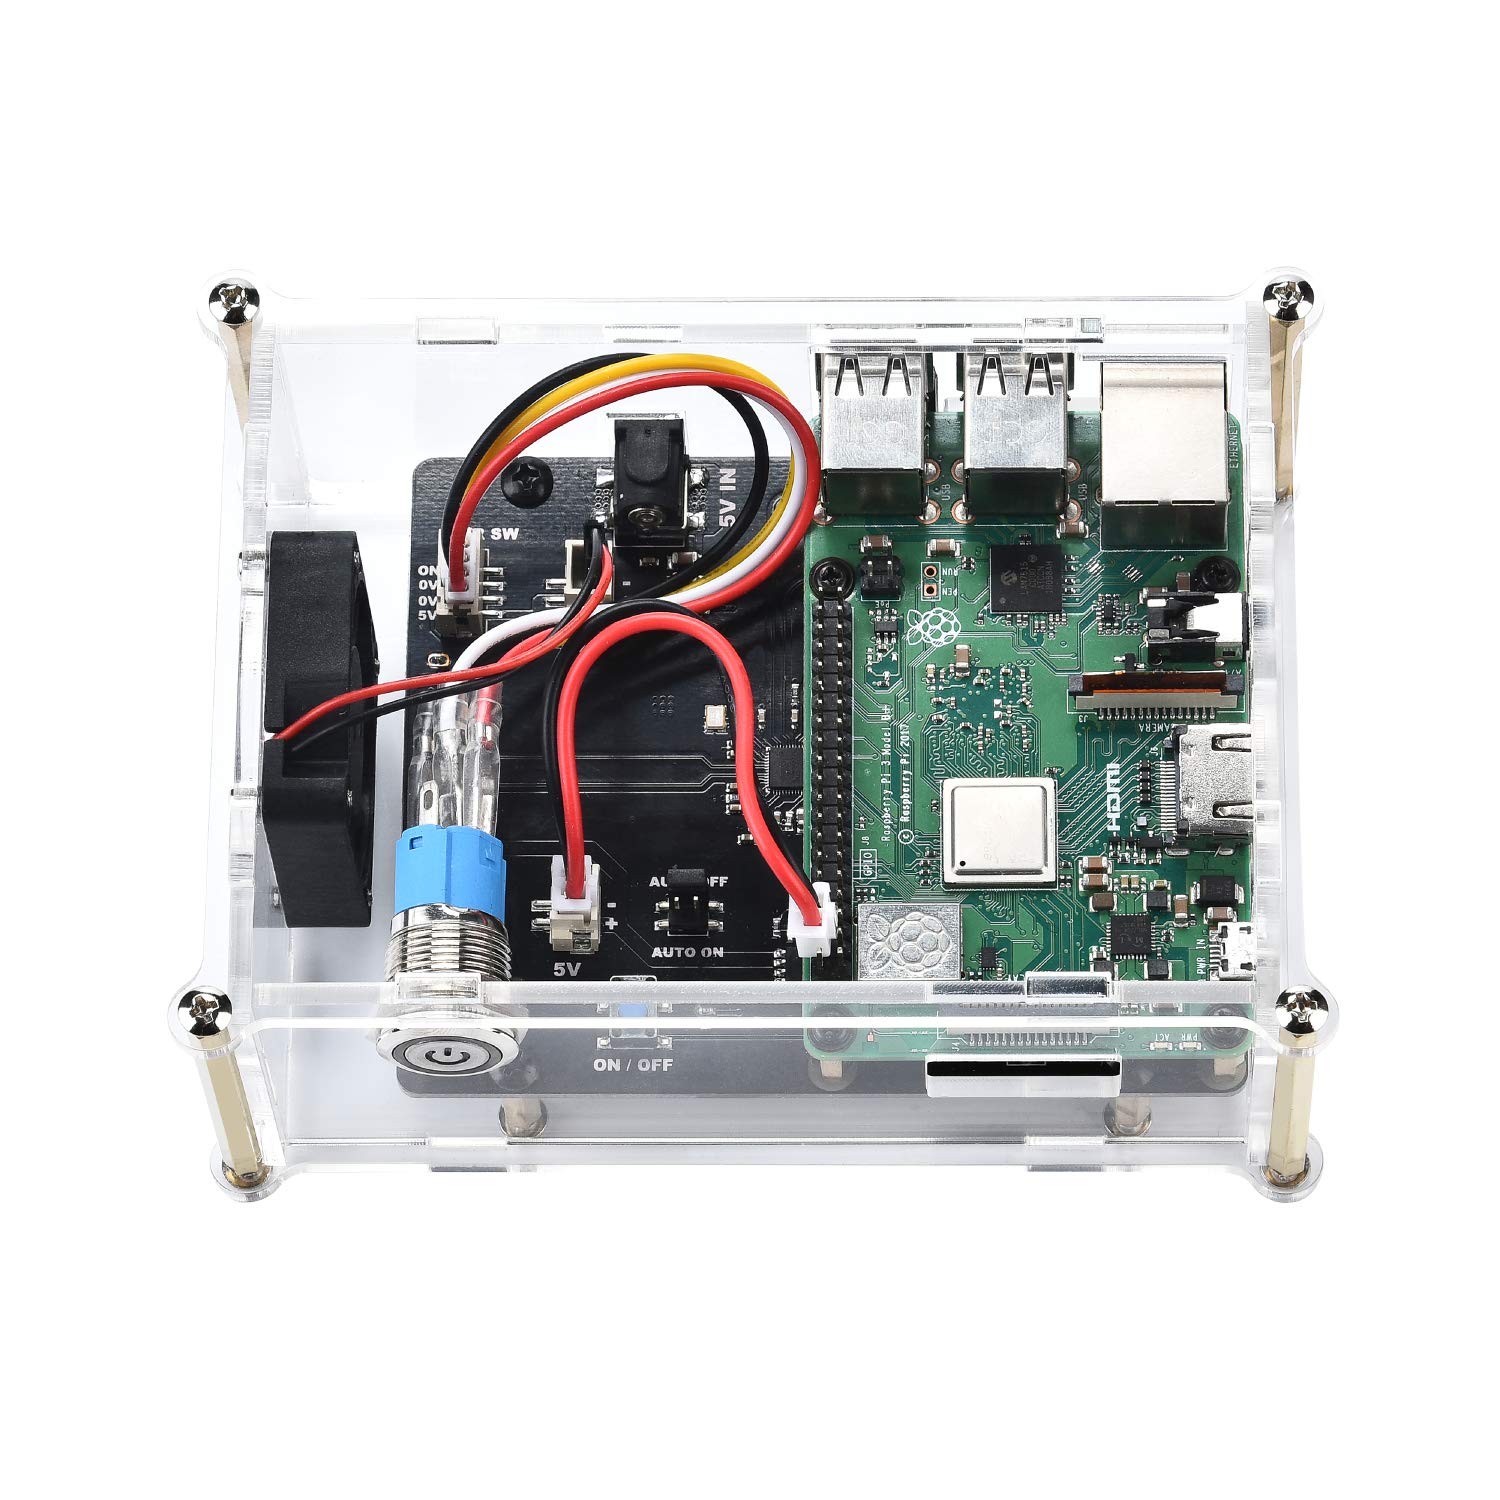 Acrylic Case with Cooling Fan for Raspberry Pi X820 V3.0 2.5" SATA HDD/SSD Shield Expansion Board Kit